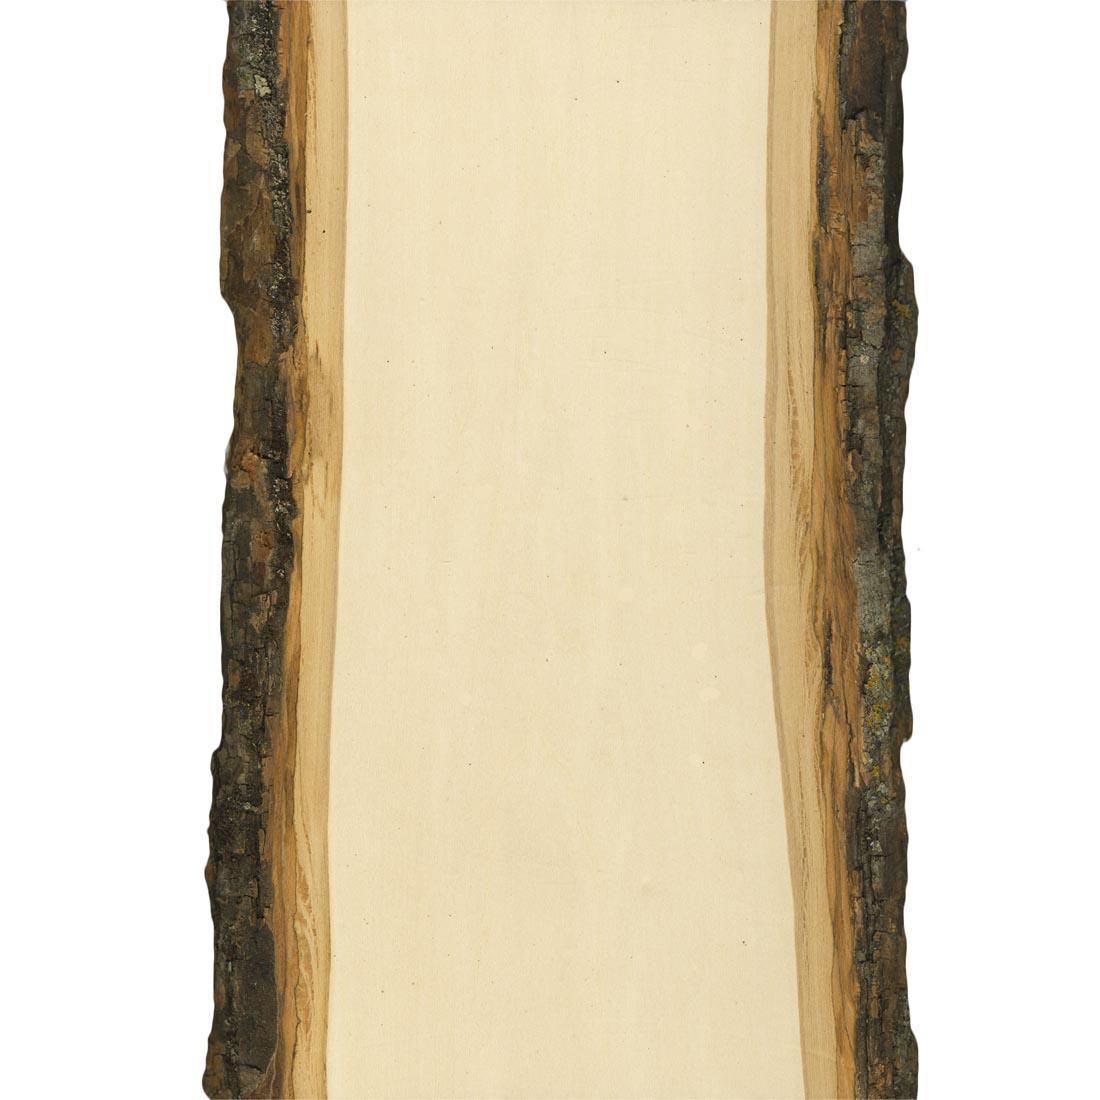 1/2" thick, small-sized rectangular Basswood plank with natural bark on 2 edges